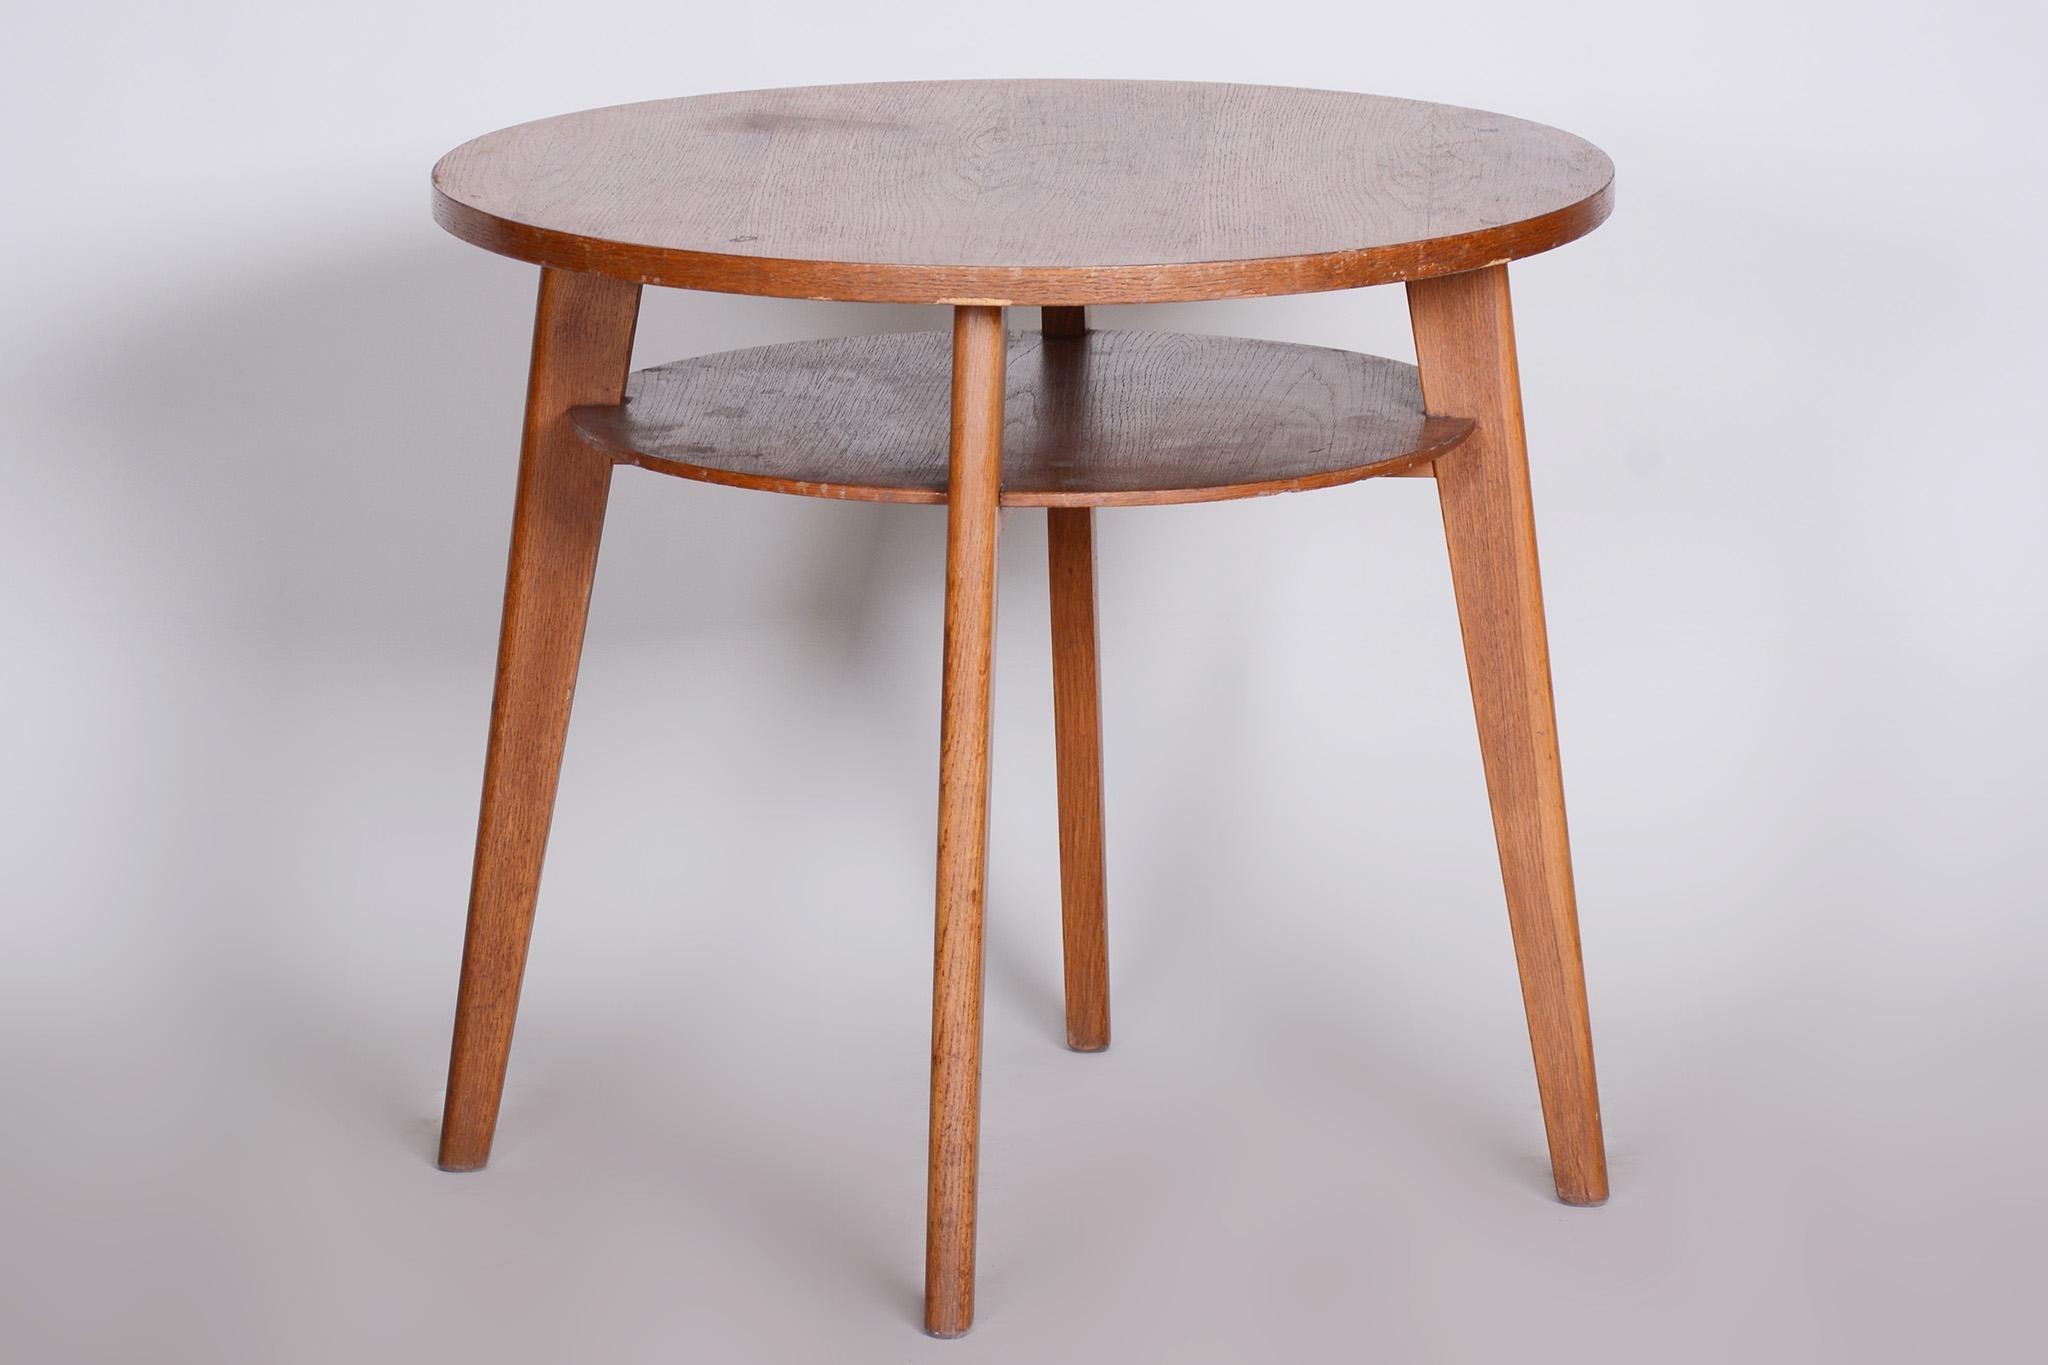 Small table.
Czech midcentury
Material: Oak
Period: 1950-1959.